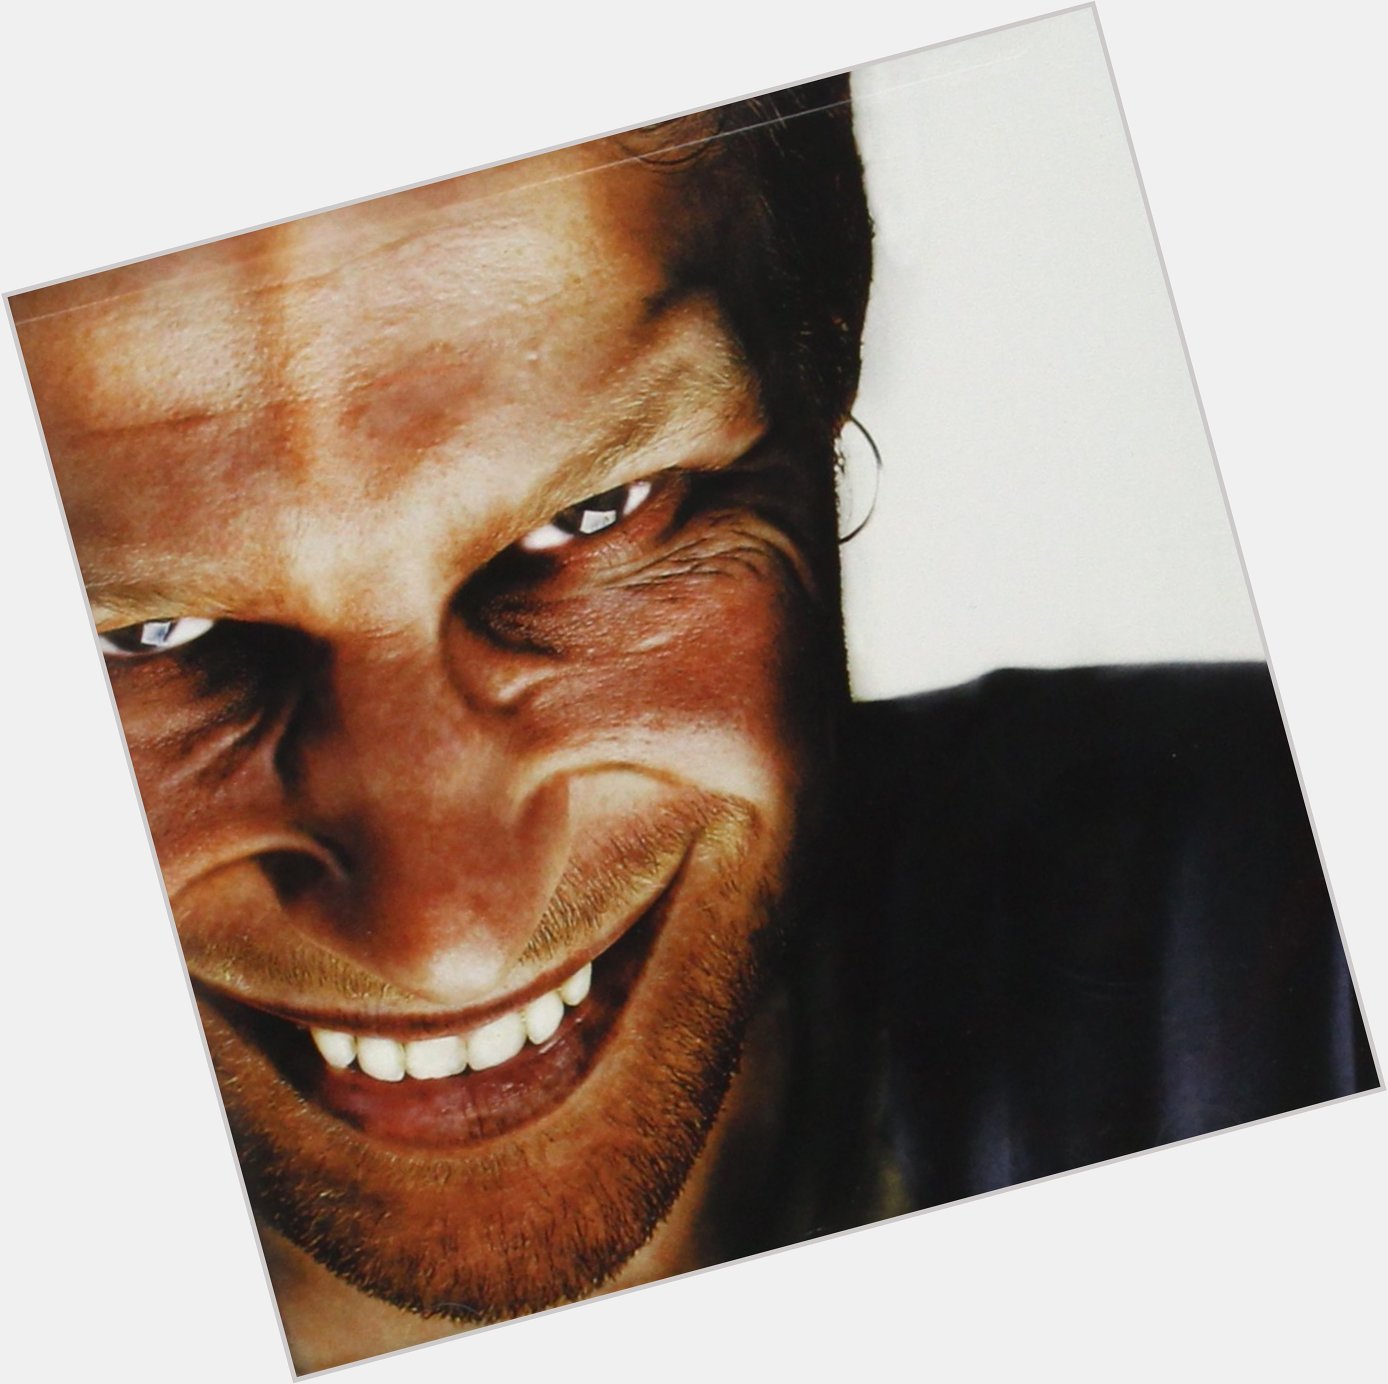 Happy birthday to Richard D. James!

Read our Beginner\s Guide to the music of Aphex Twin:  